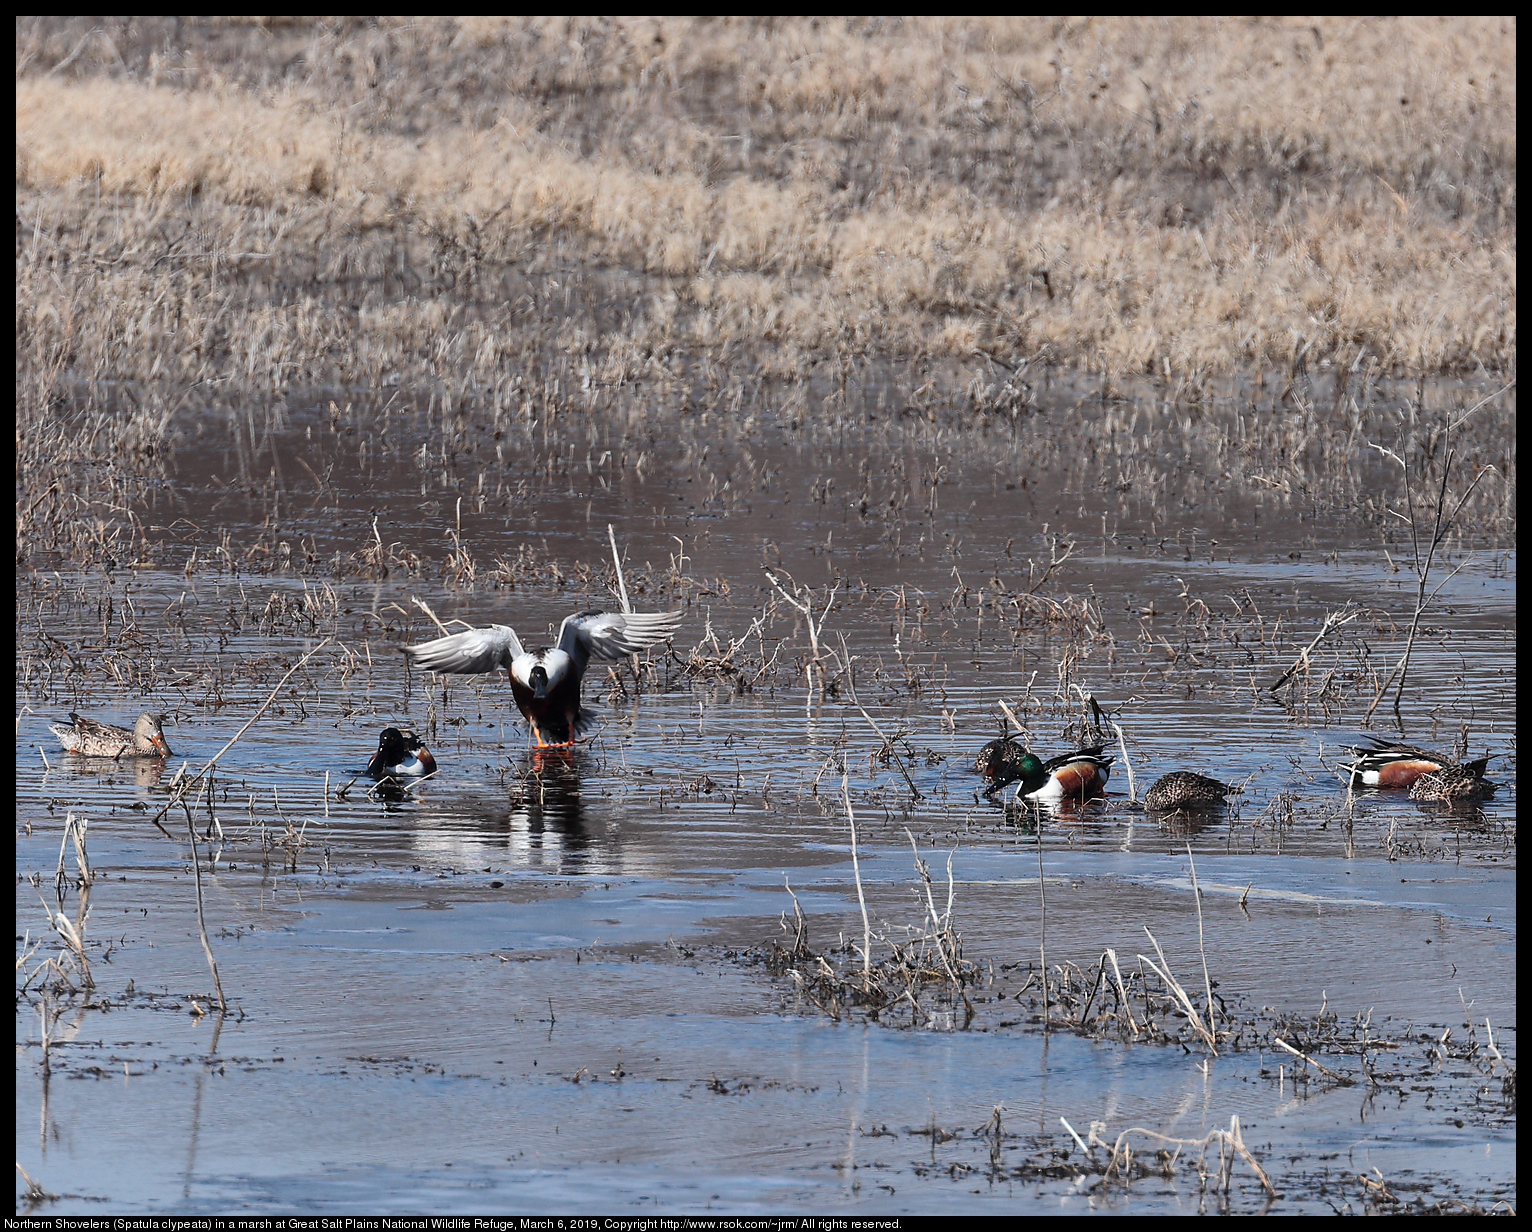 Northern Shovelers (Spatula clypeata) in a marsh at Great Salt Plains National Wildlife Refuge, March 6, 2019